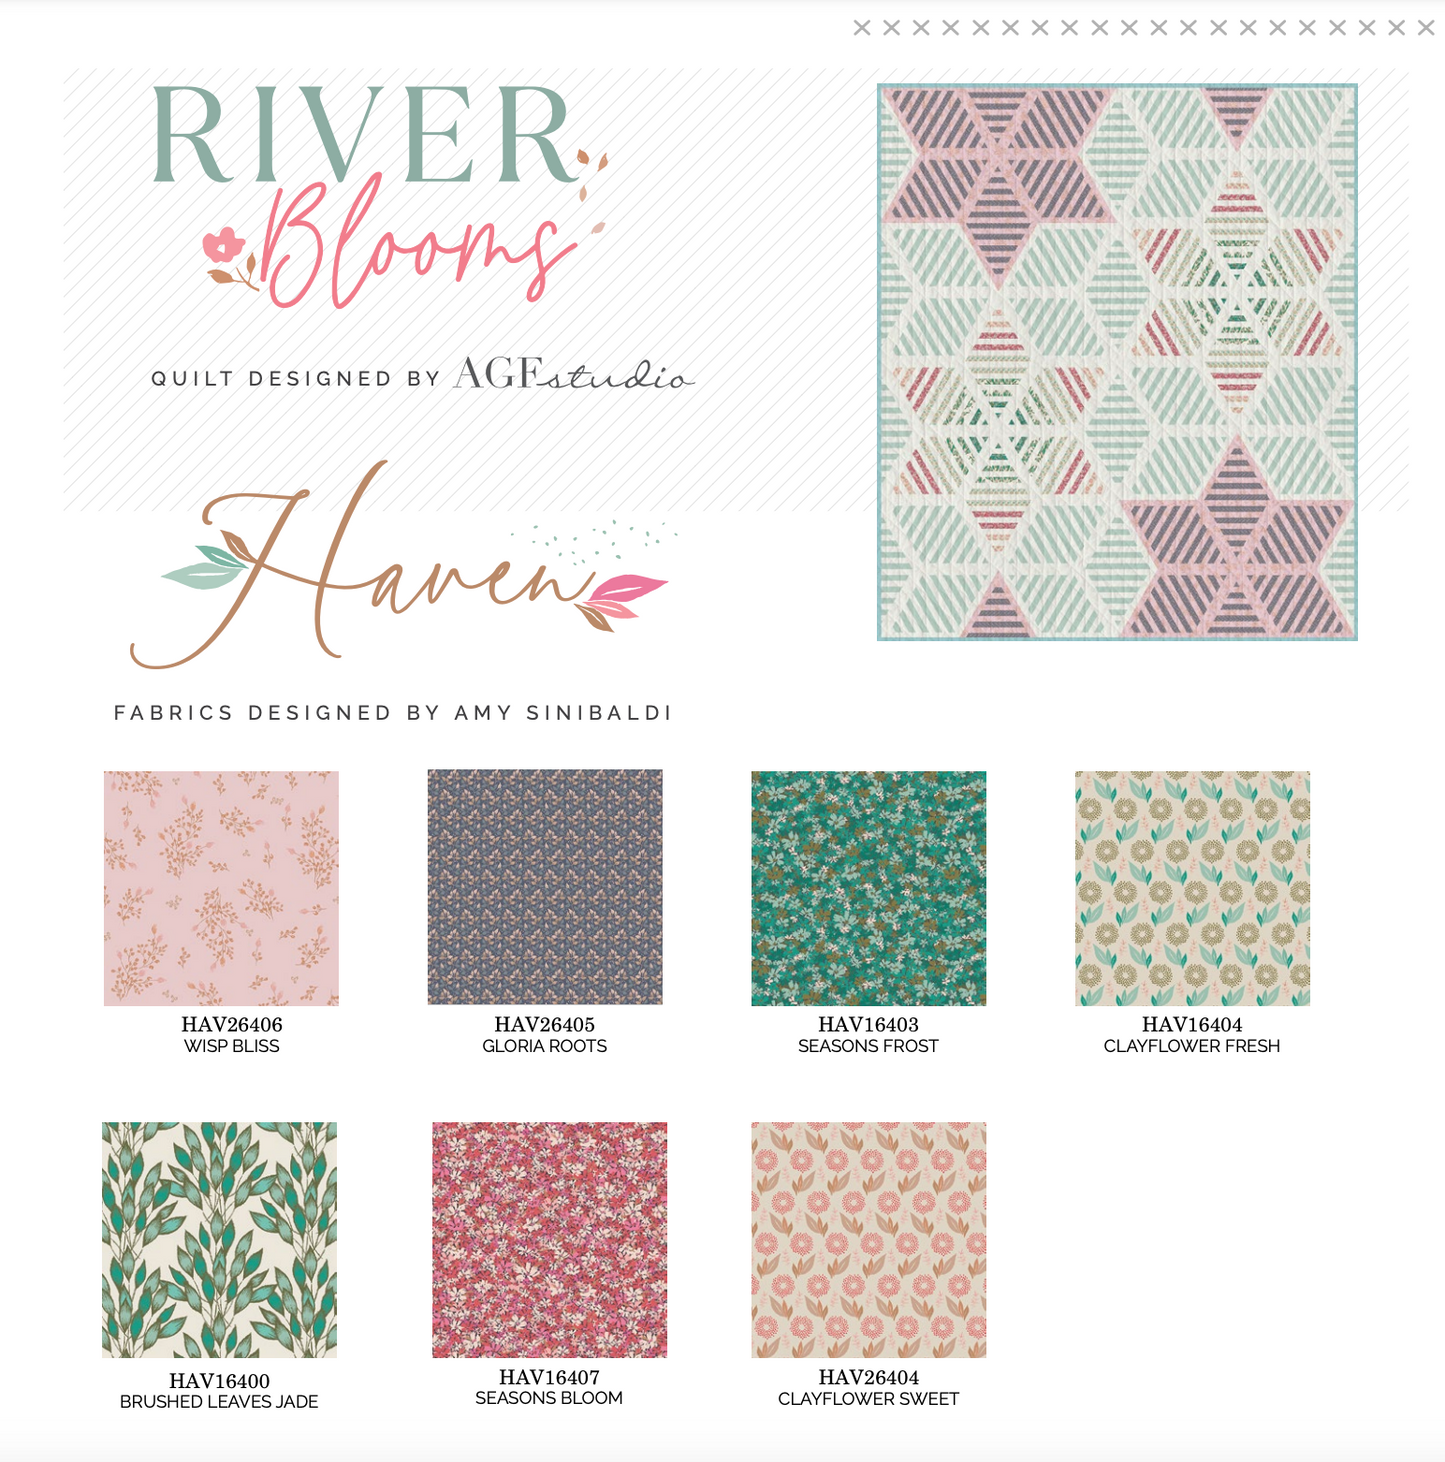 River Blooms Quilt Kit featuring Haven by Amy Sinibaldi